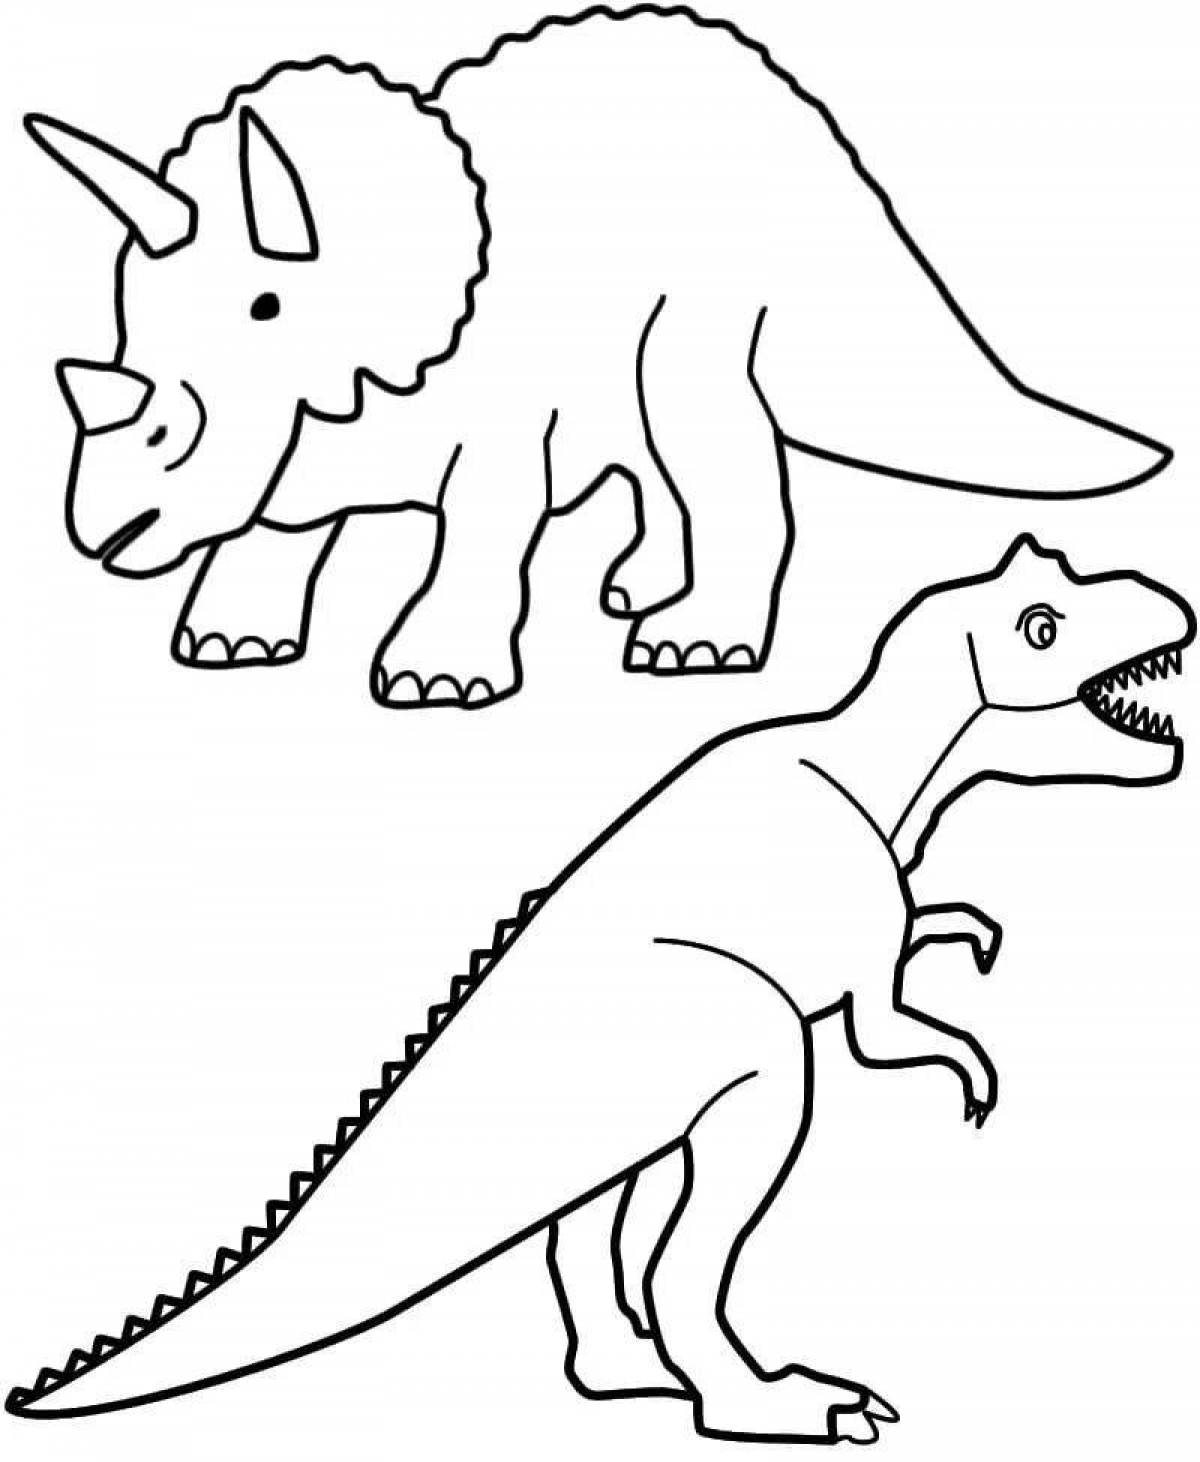 Coloring live triceratops dinosaur